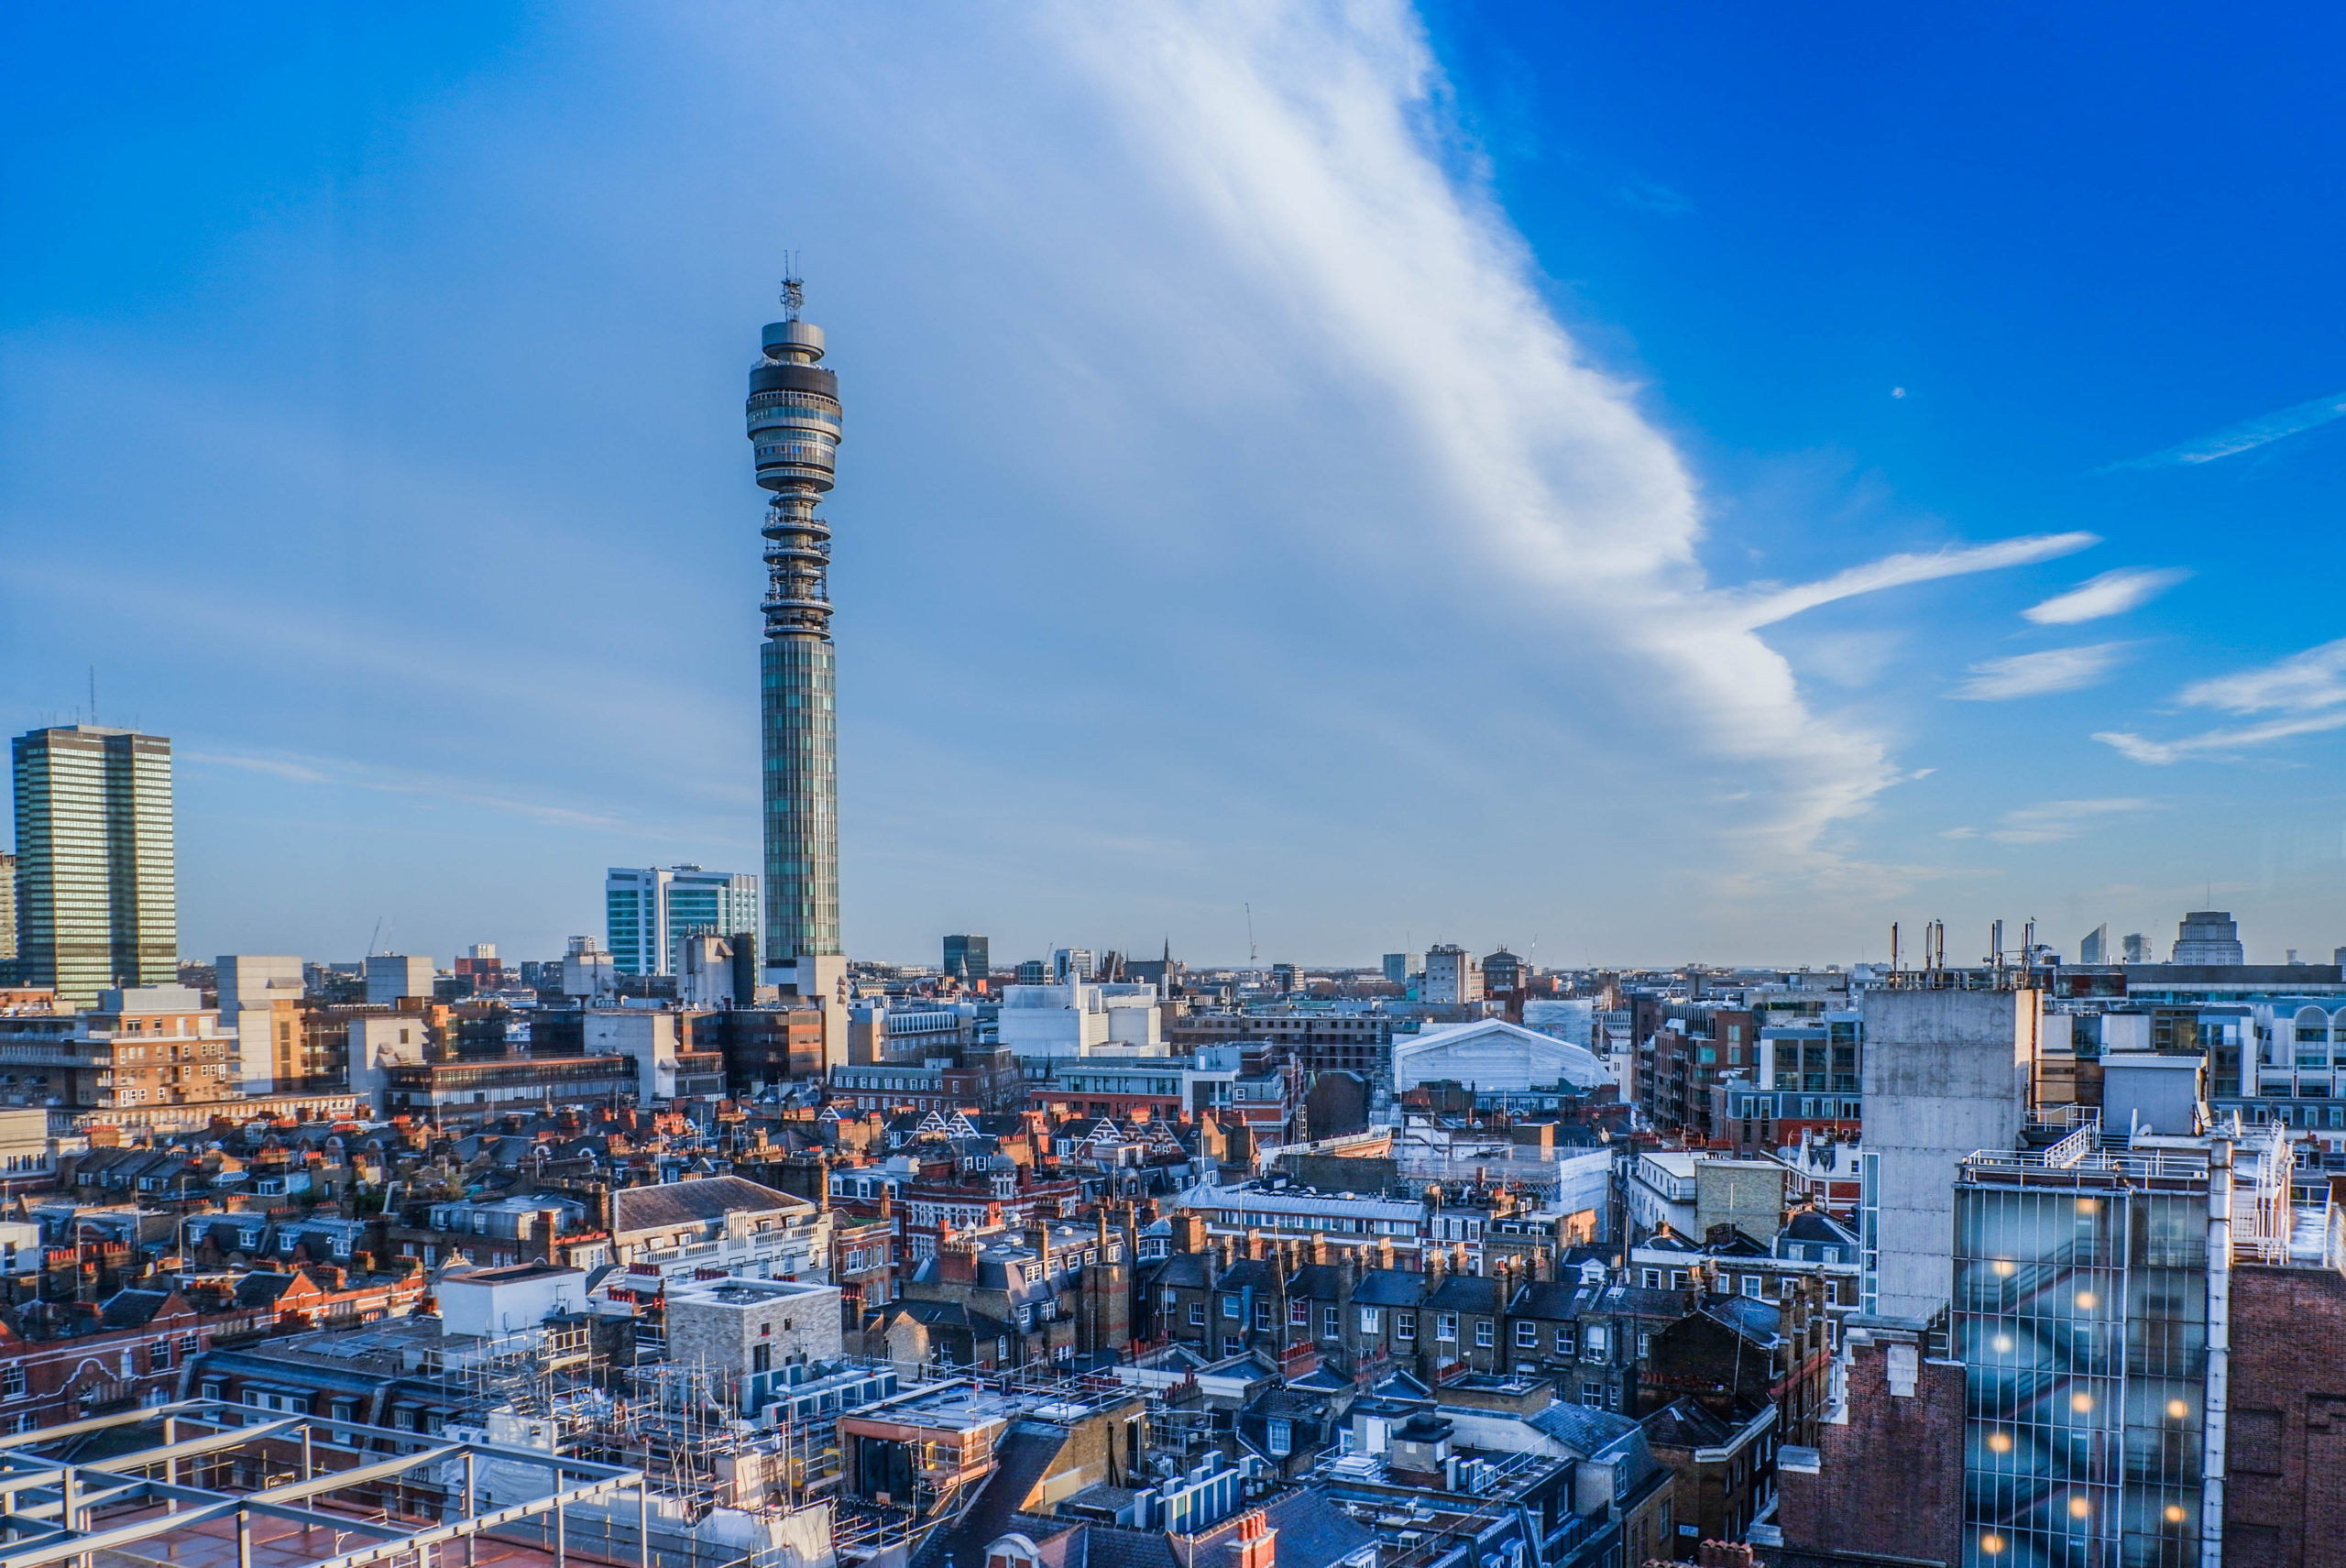 the BT tower in the London skyline